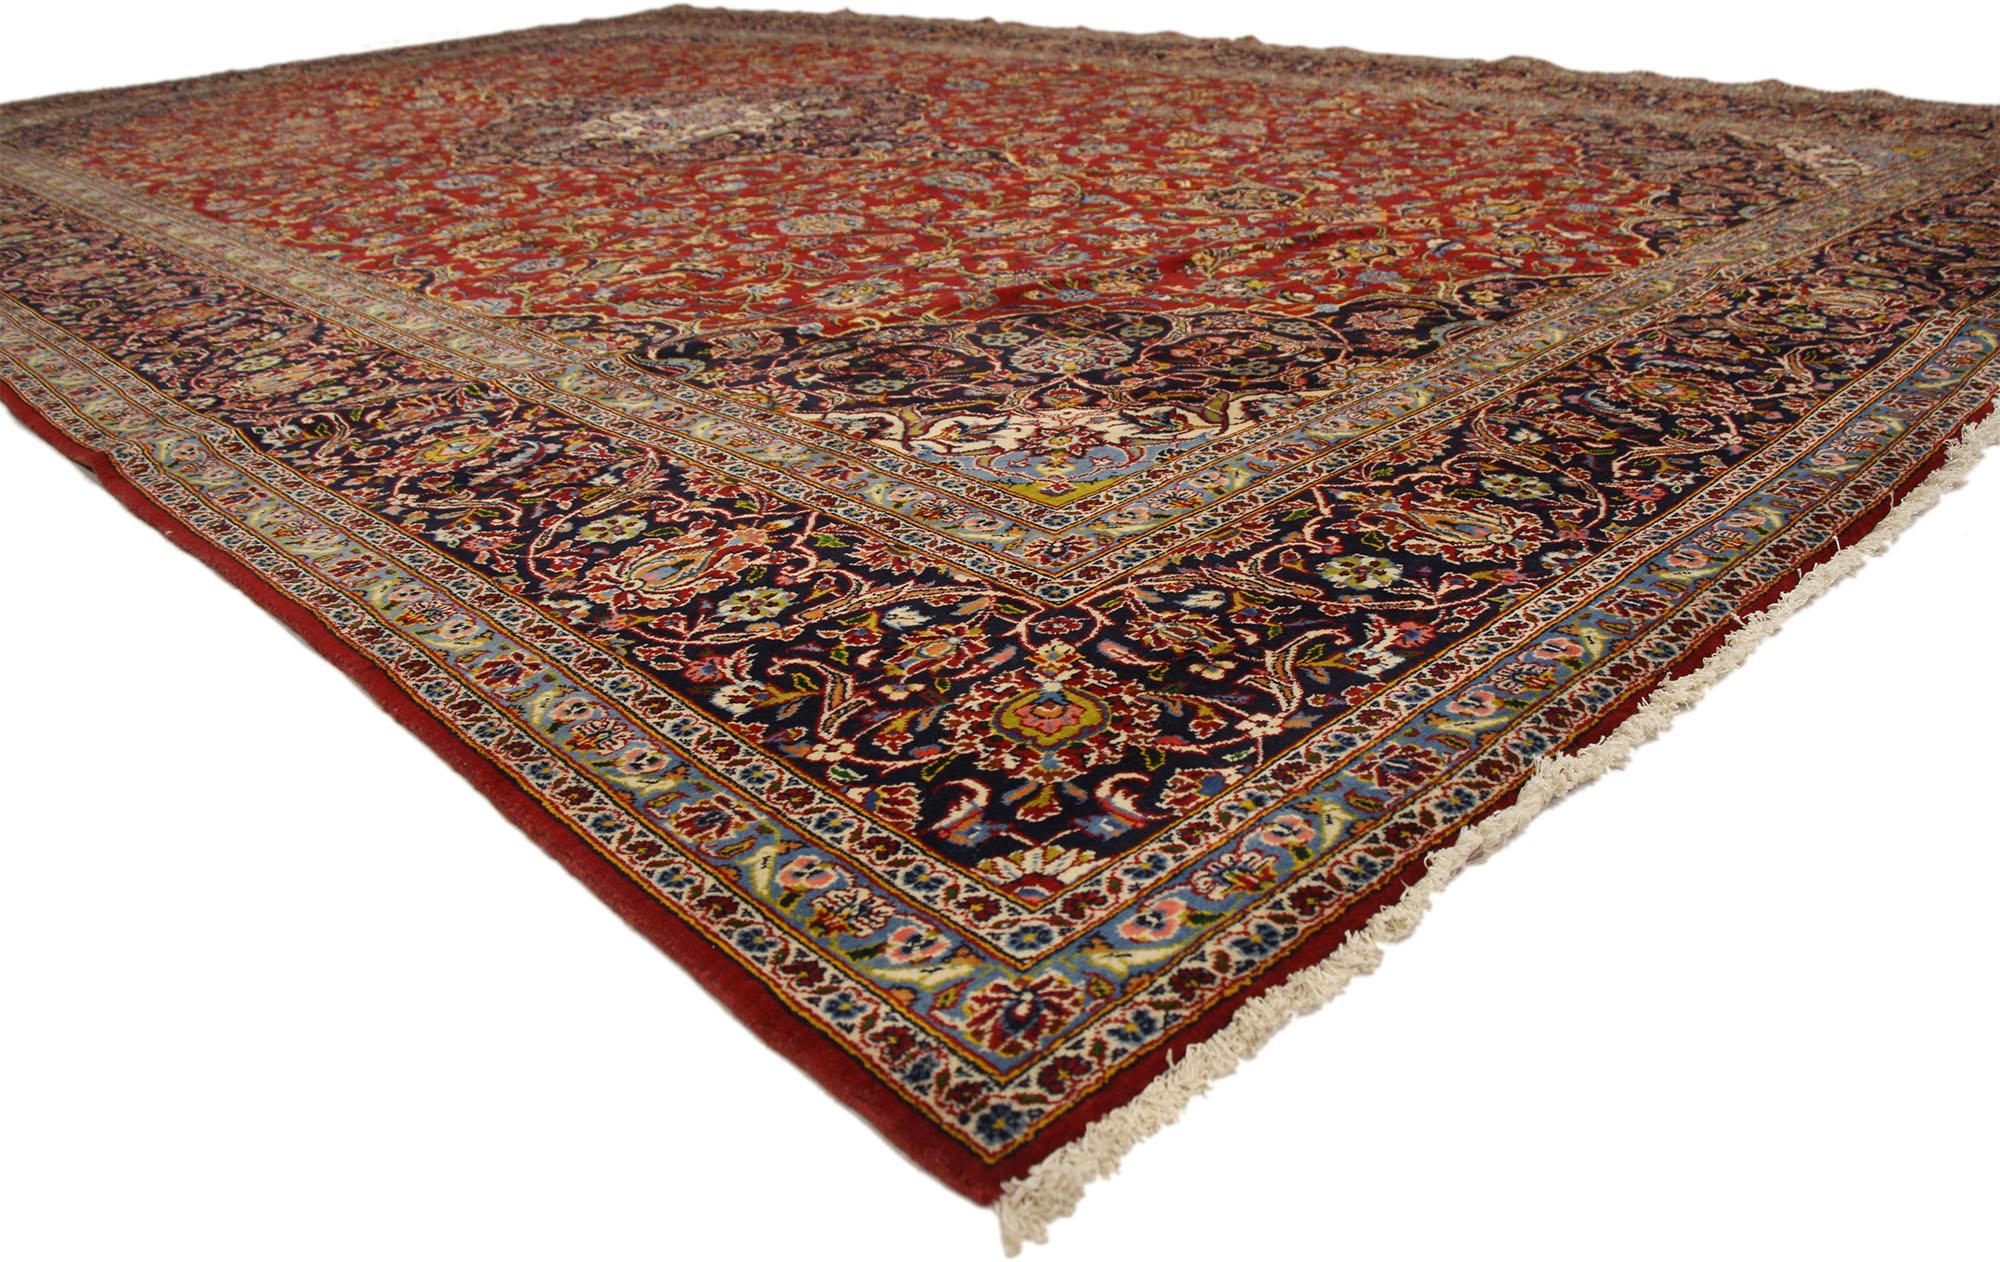 76210 Vintage Persian Kashan Rug, 10'06 x 17'01. 
Emanating a timeless design and beguiling beauty, this hand-knotted wool vintage Persian Kashan rug is poised to impress. The abrashed red field features a round lobed floral medallion surrounded by